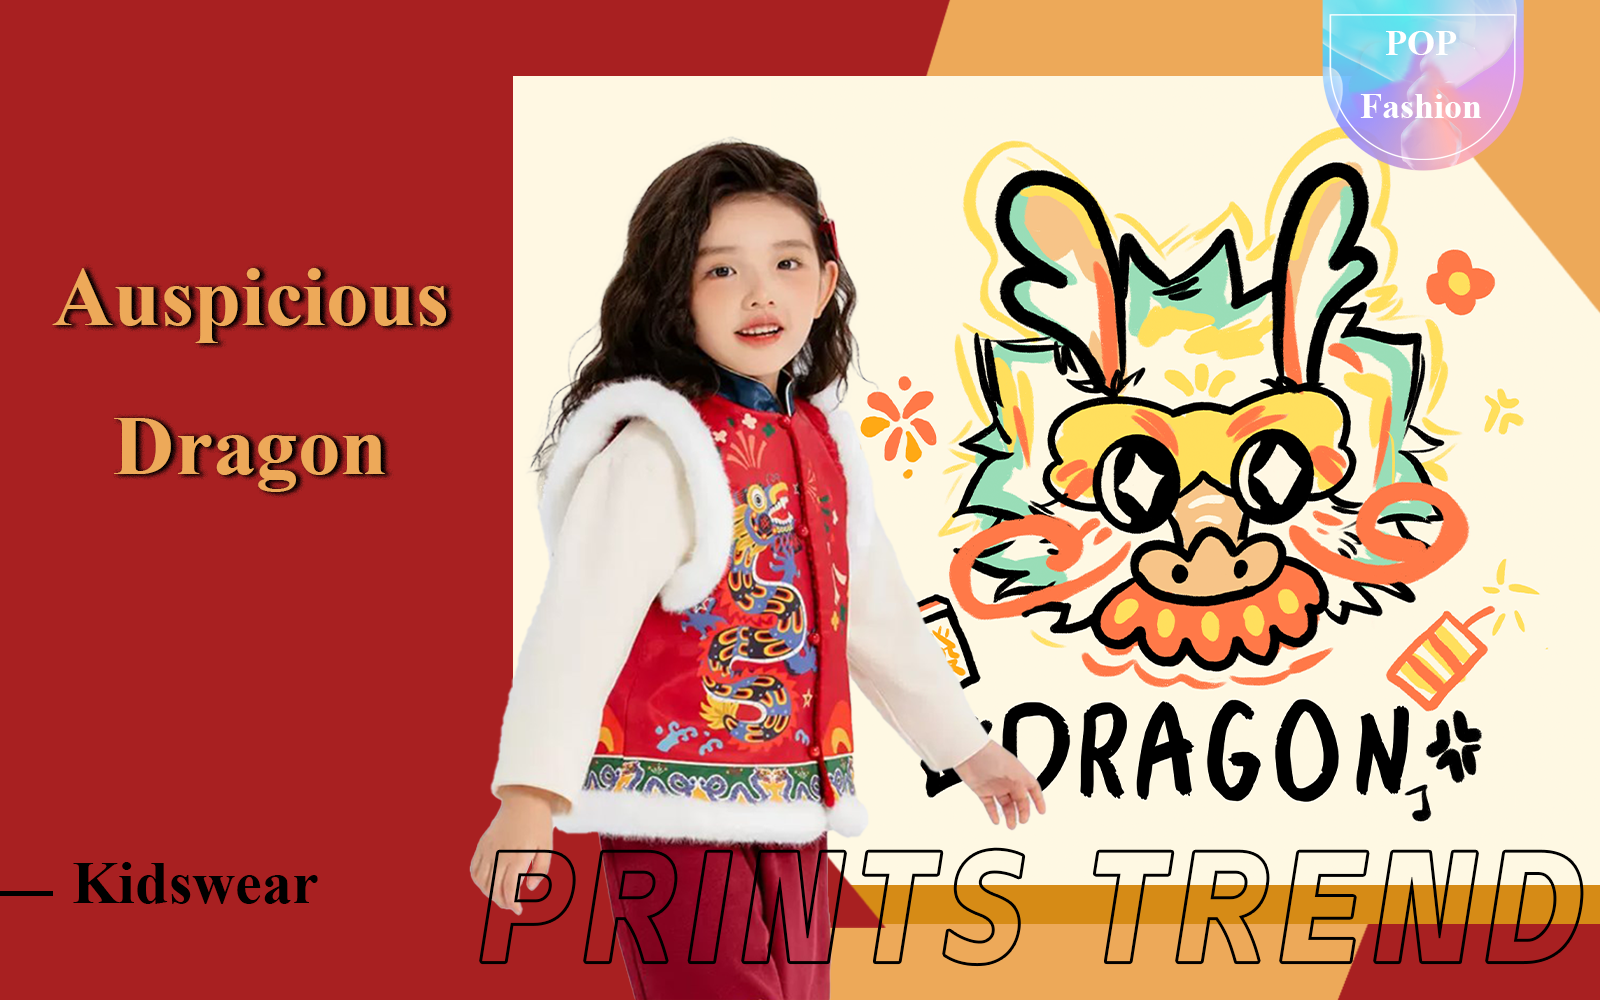 Auspicious Dragon -- The Pattern Trend for Kids' New Year Clothing